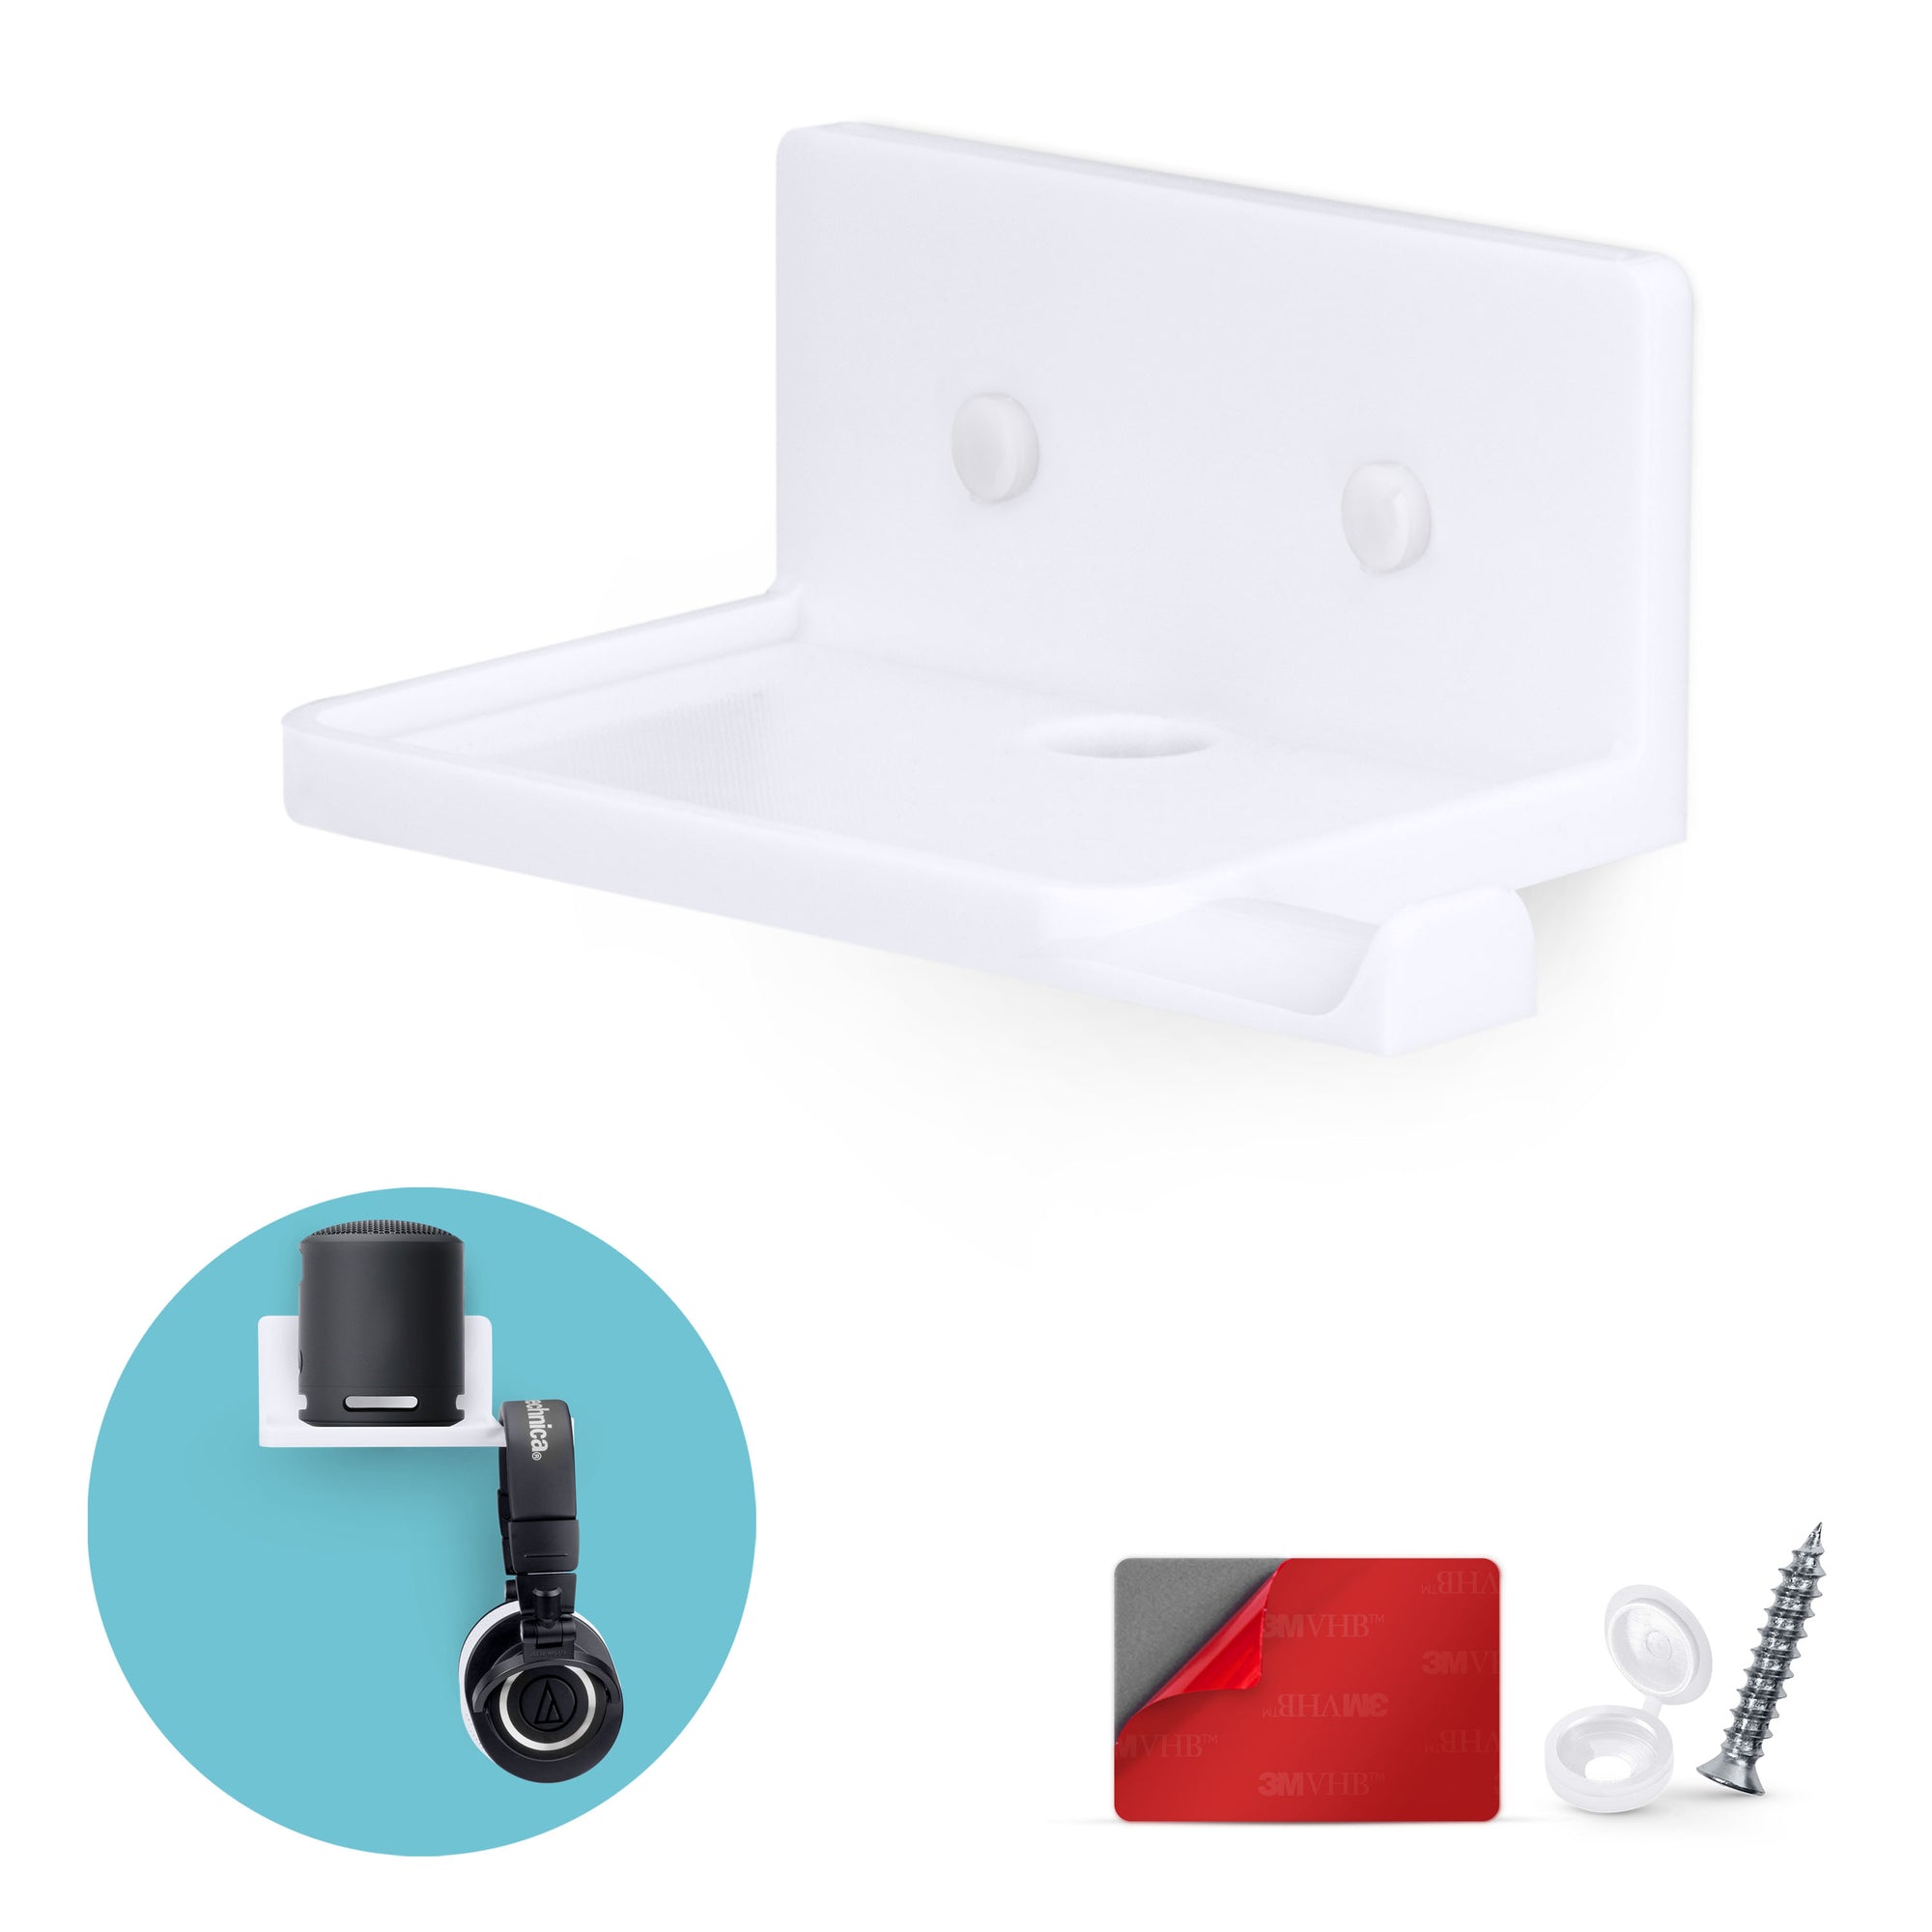 5” Small Floating Shelf with Headphone Hanger, Adhesive & Screw In, For Bluetooth Speakers, Cameras, Plants, Toys, Books & More By Brainwavz (RF2105-HP, White)